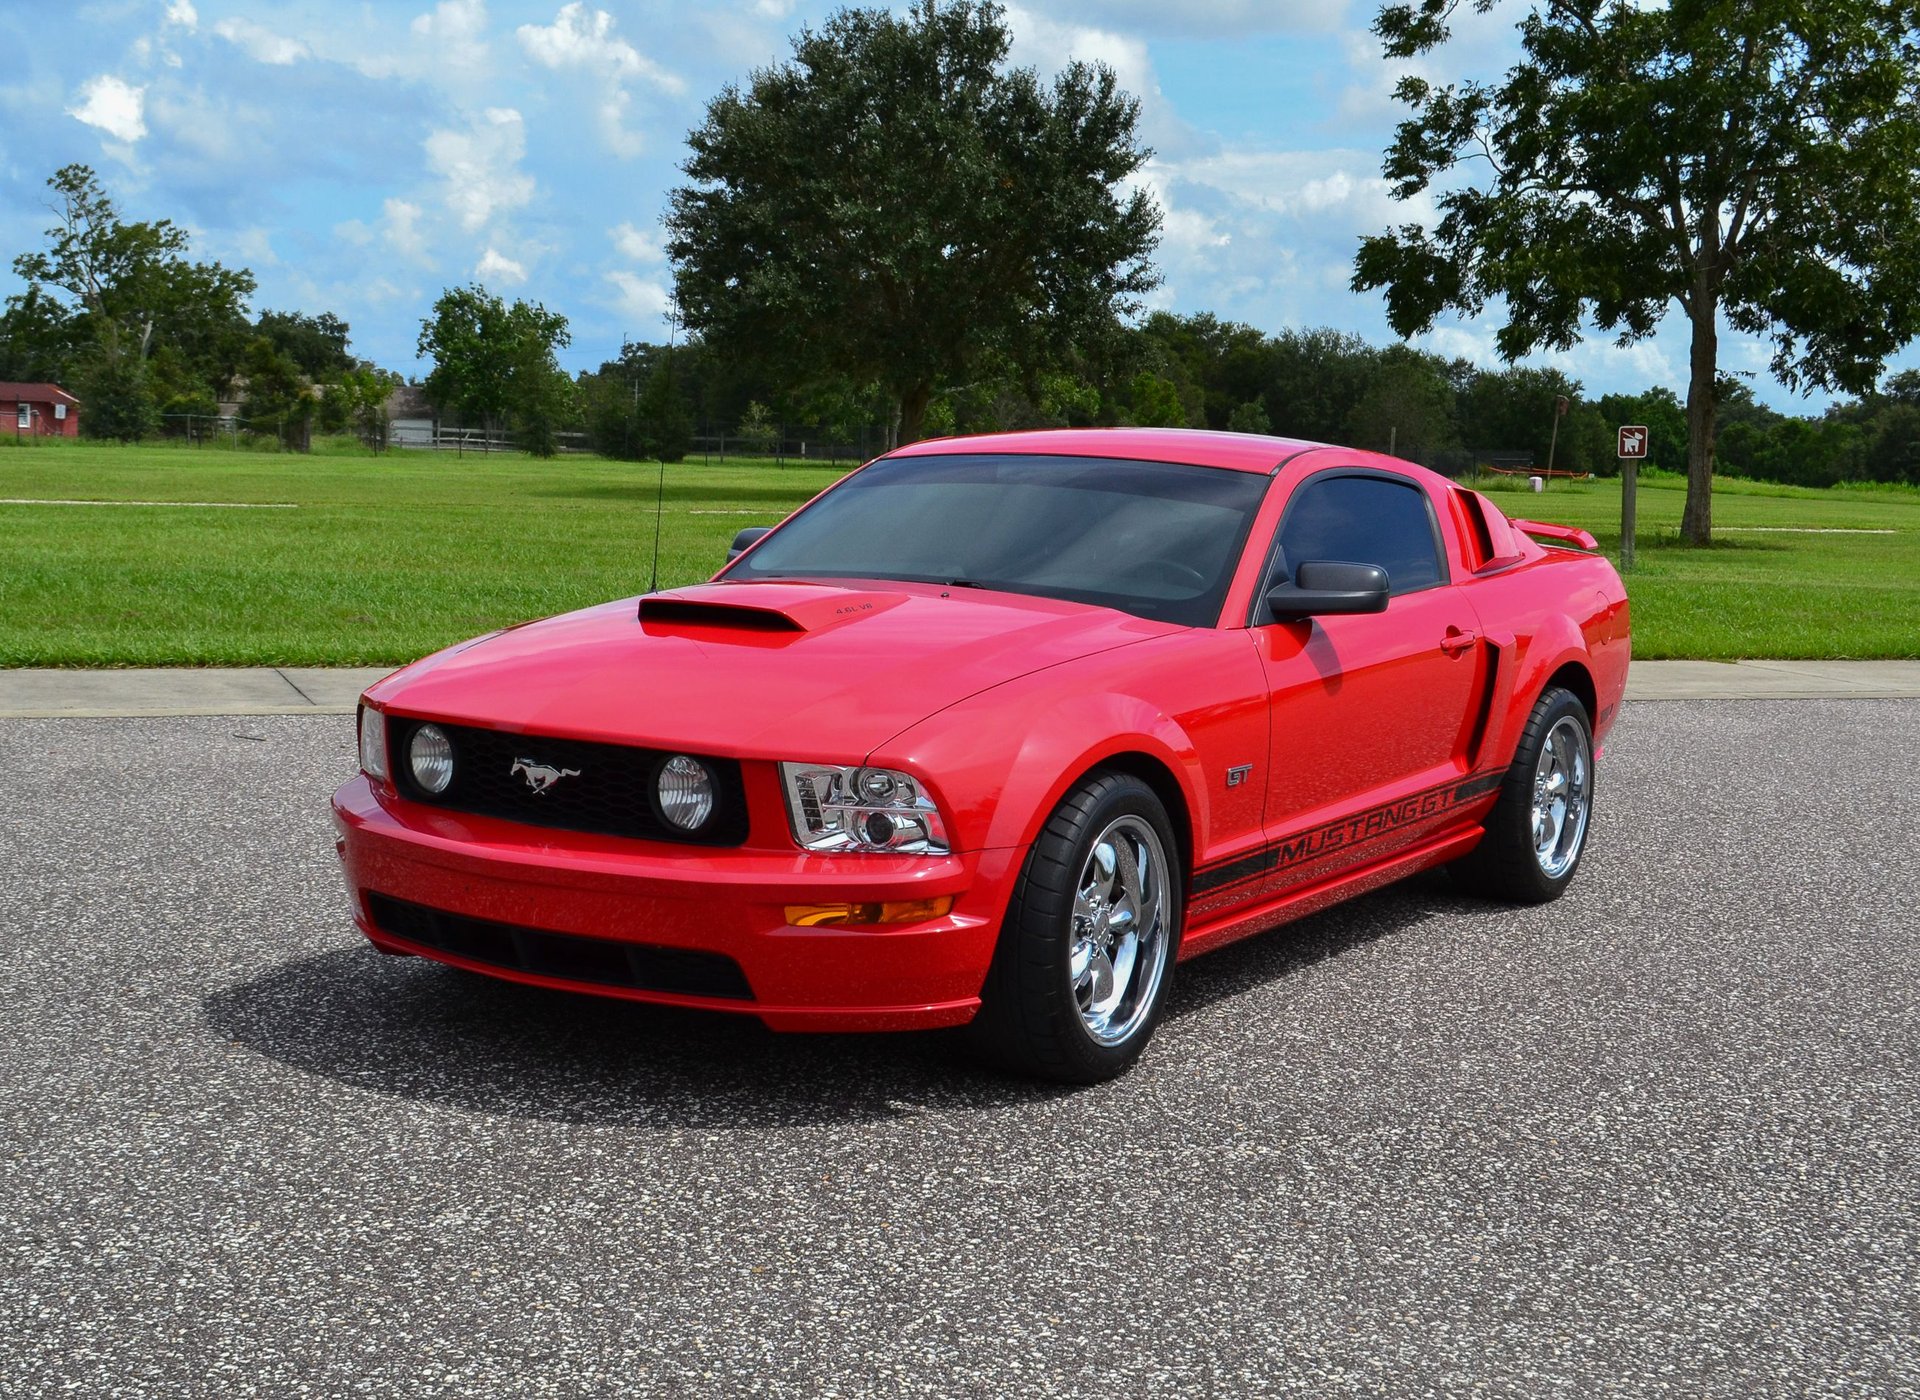 2006 Ford Mustang | PJ's Auto World Classic Cars for Sale